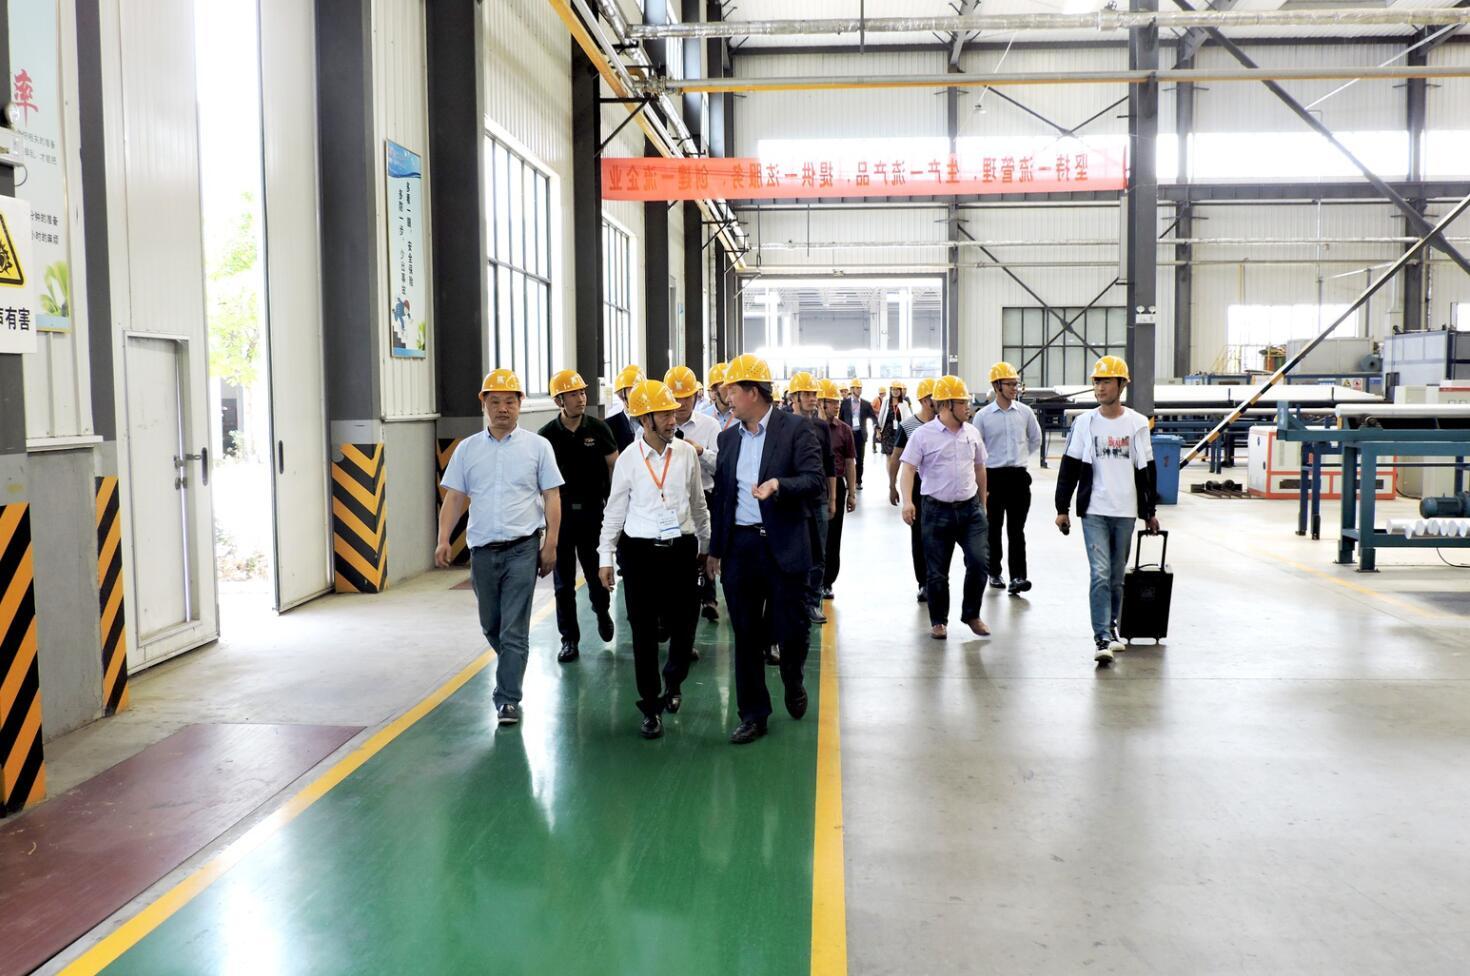 The delegation of the Aluminum Processing Committee of Guangdong Nonferrous Metals Society went to Kemet Company for research and exchange.